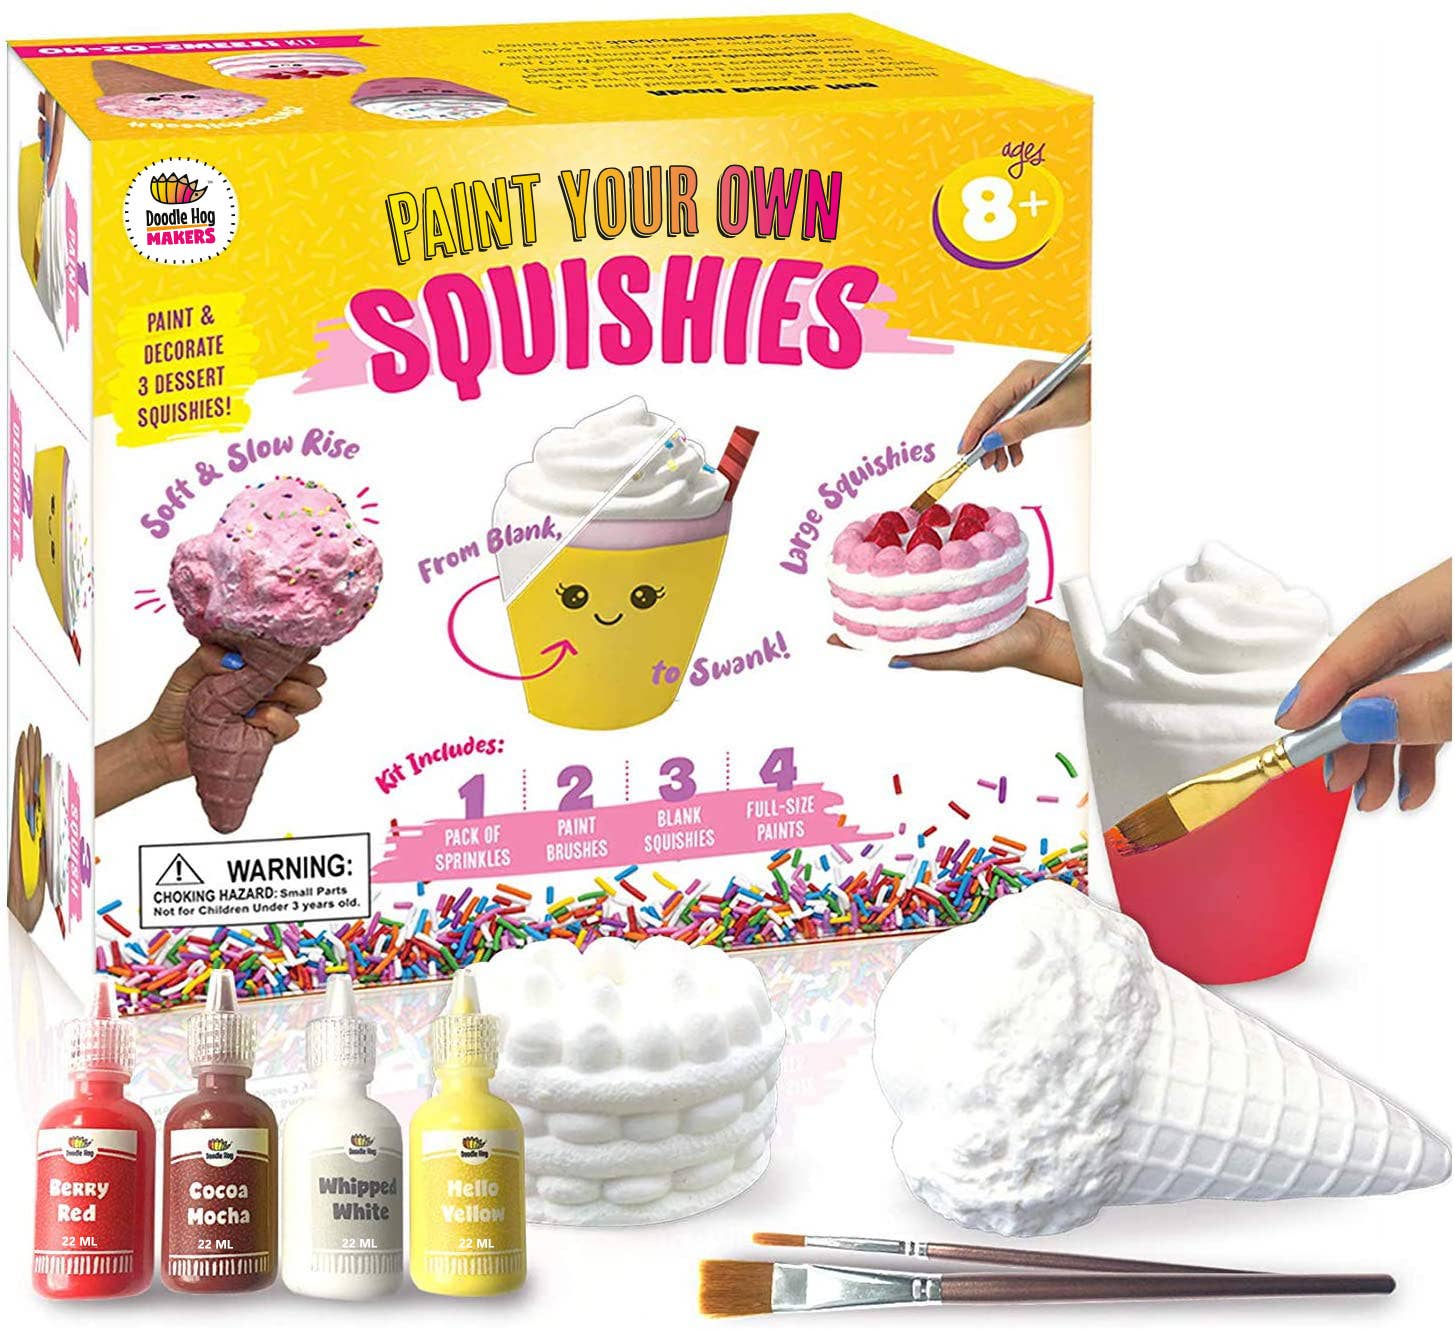 Brand New Squishy Maker!! Make Your Own Squishies! 